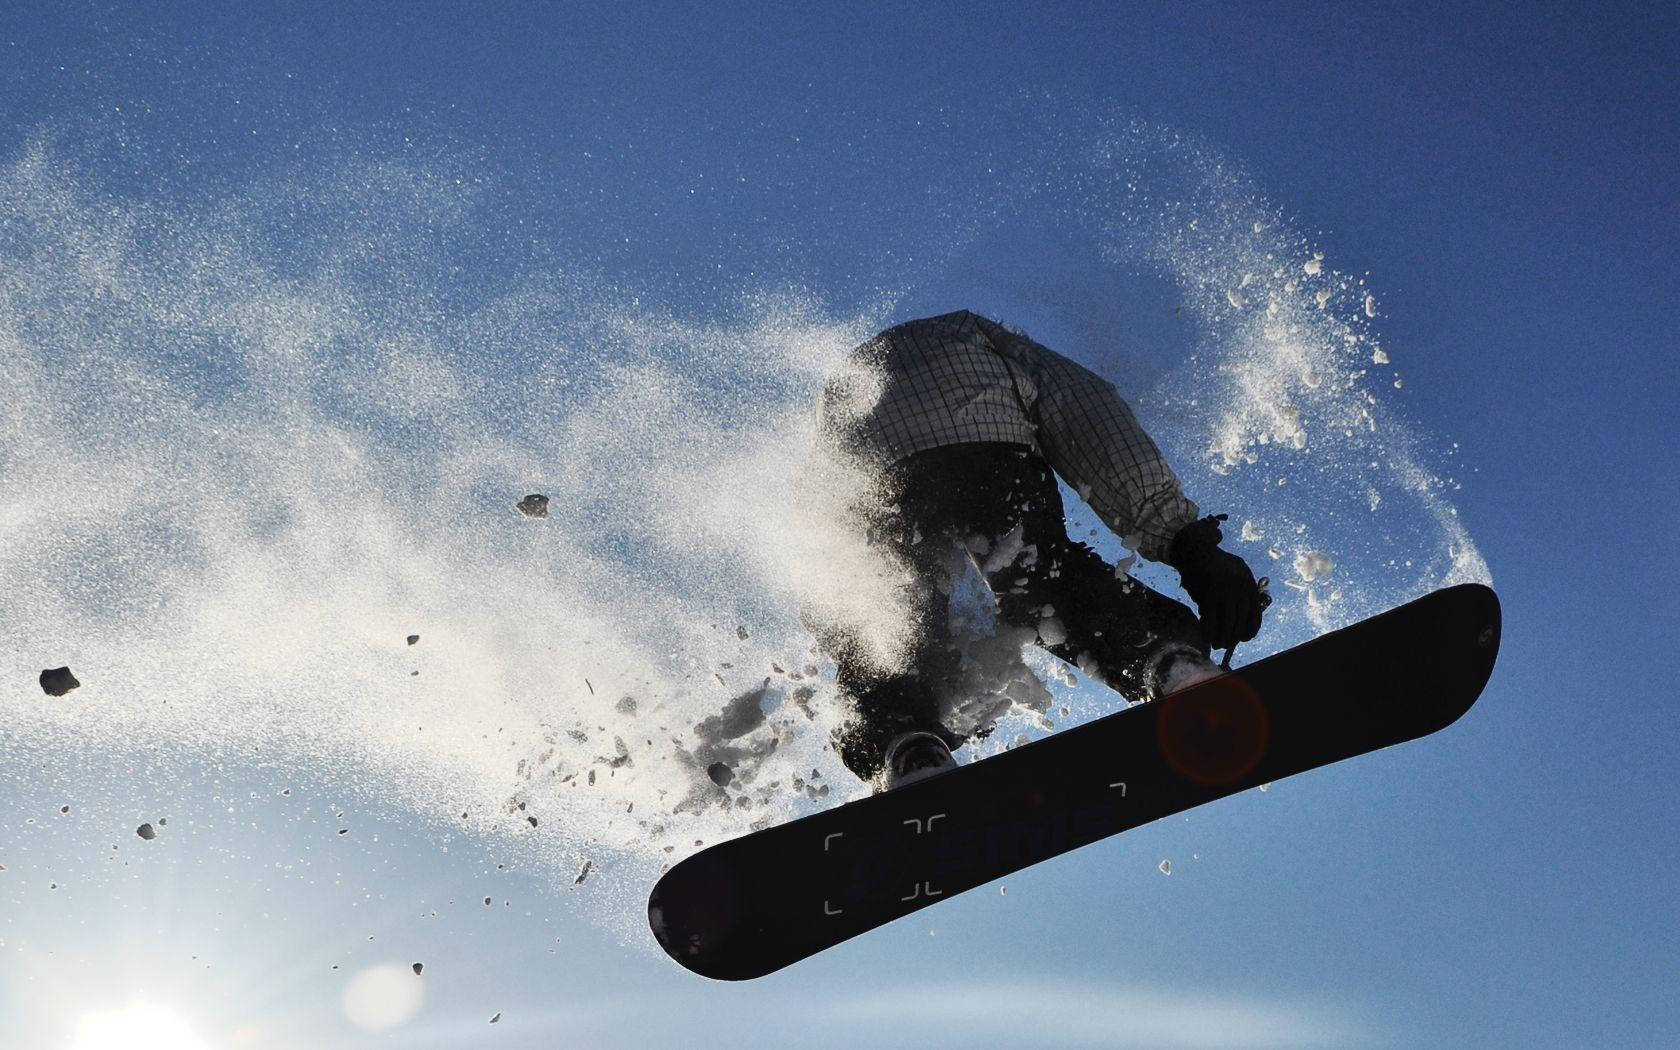 X Games Snowboarder Low-angle Shot Wallpaper